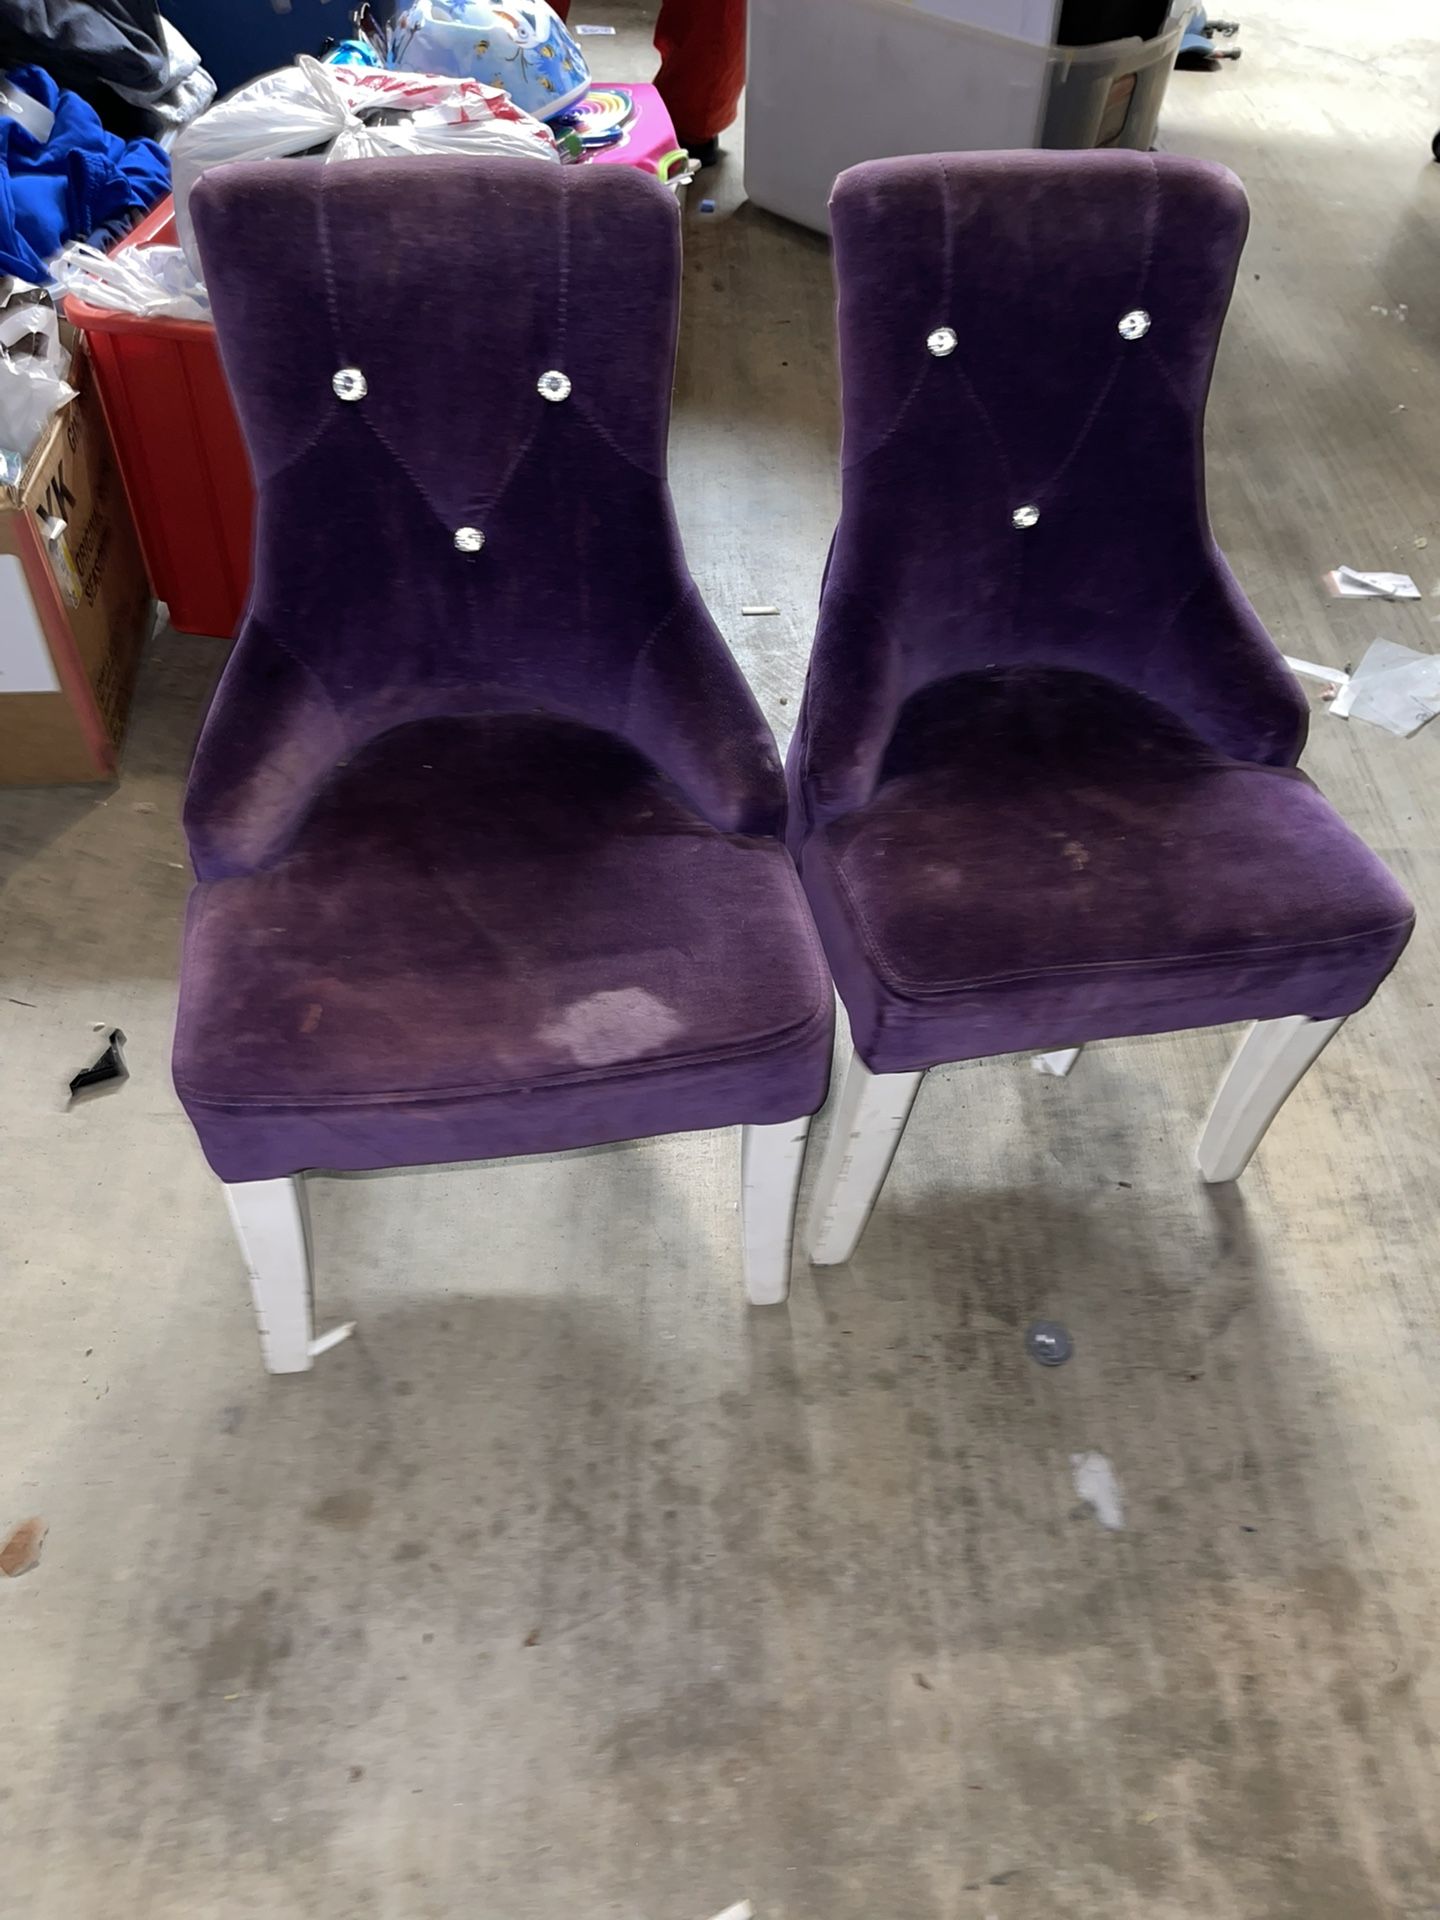 Kids Chairs 2 For $15